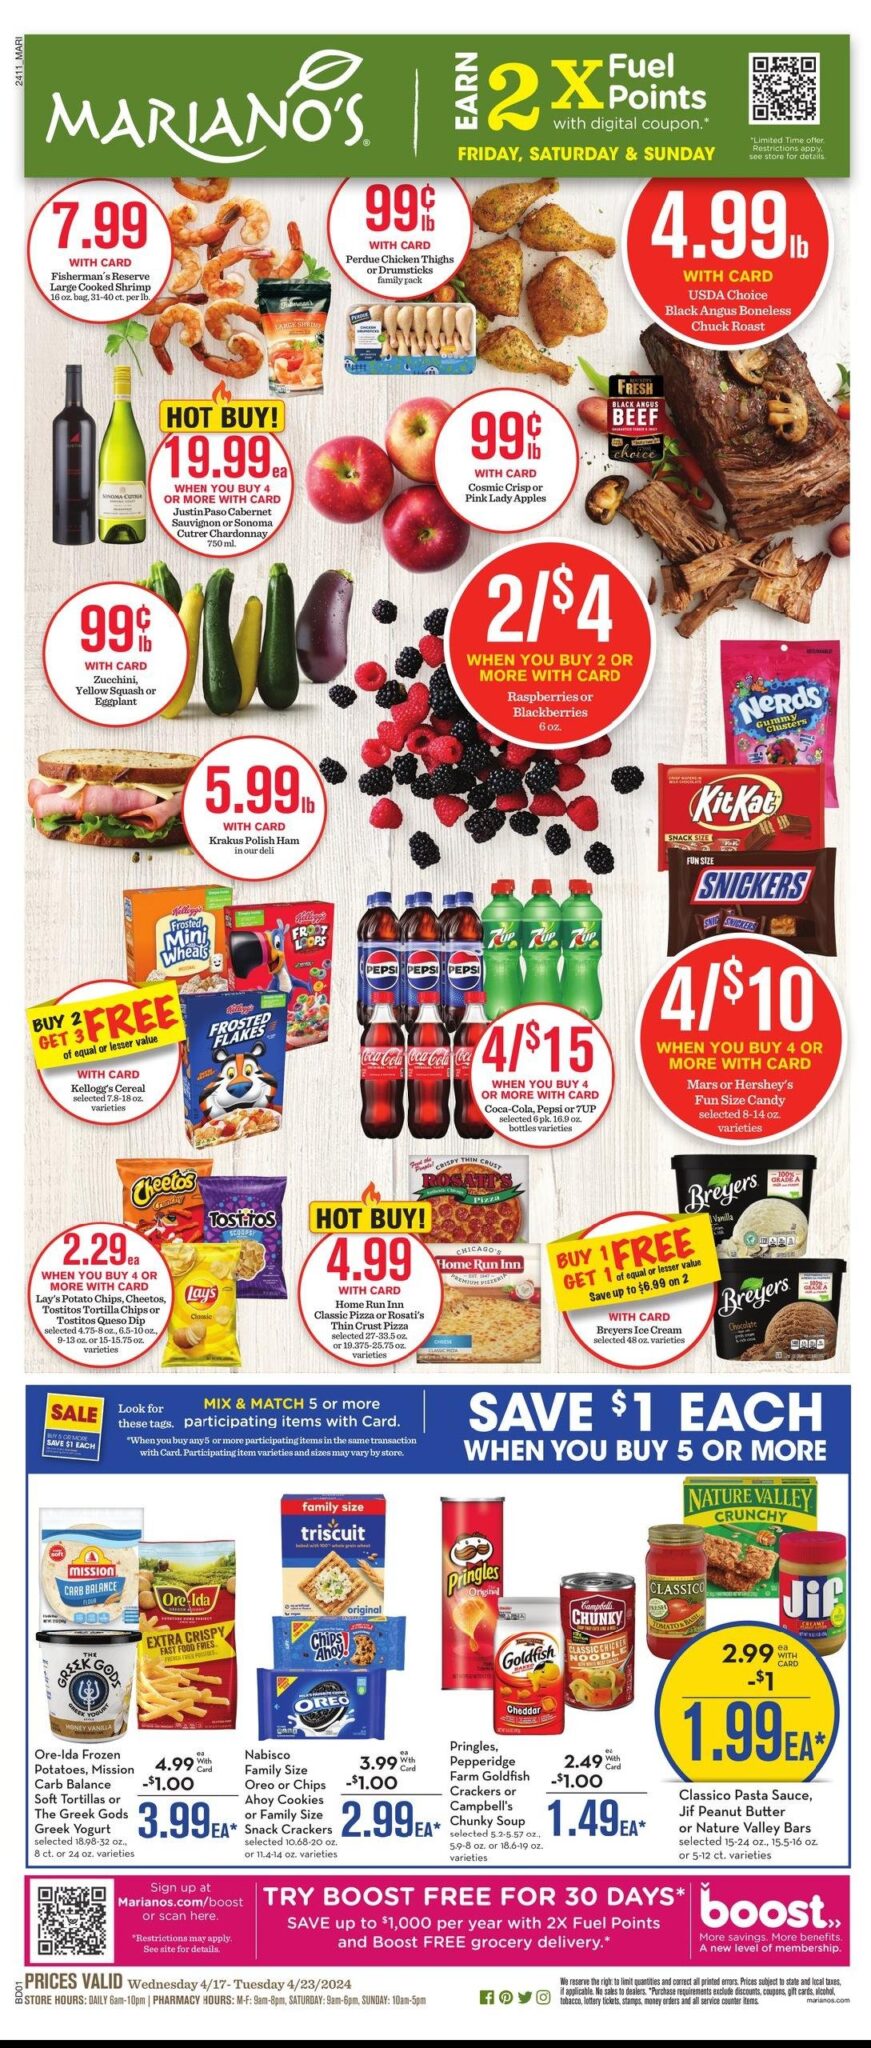 Mariano's Weekly Flyer